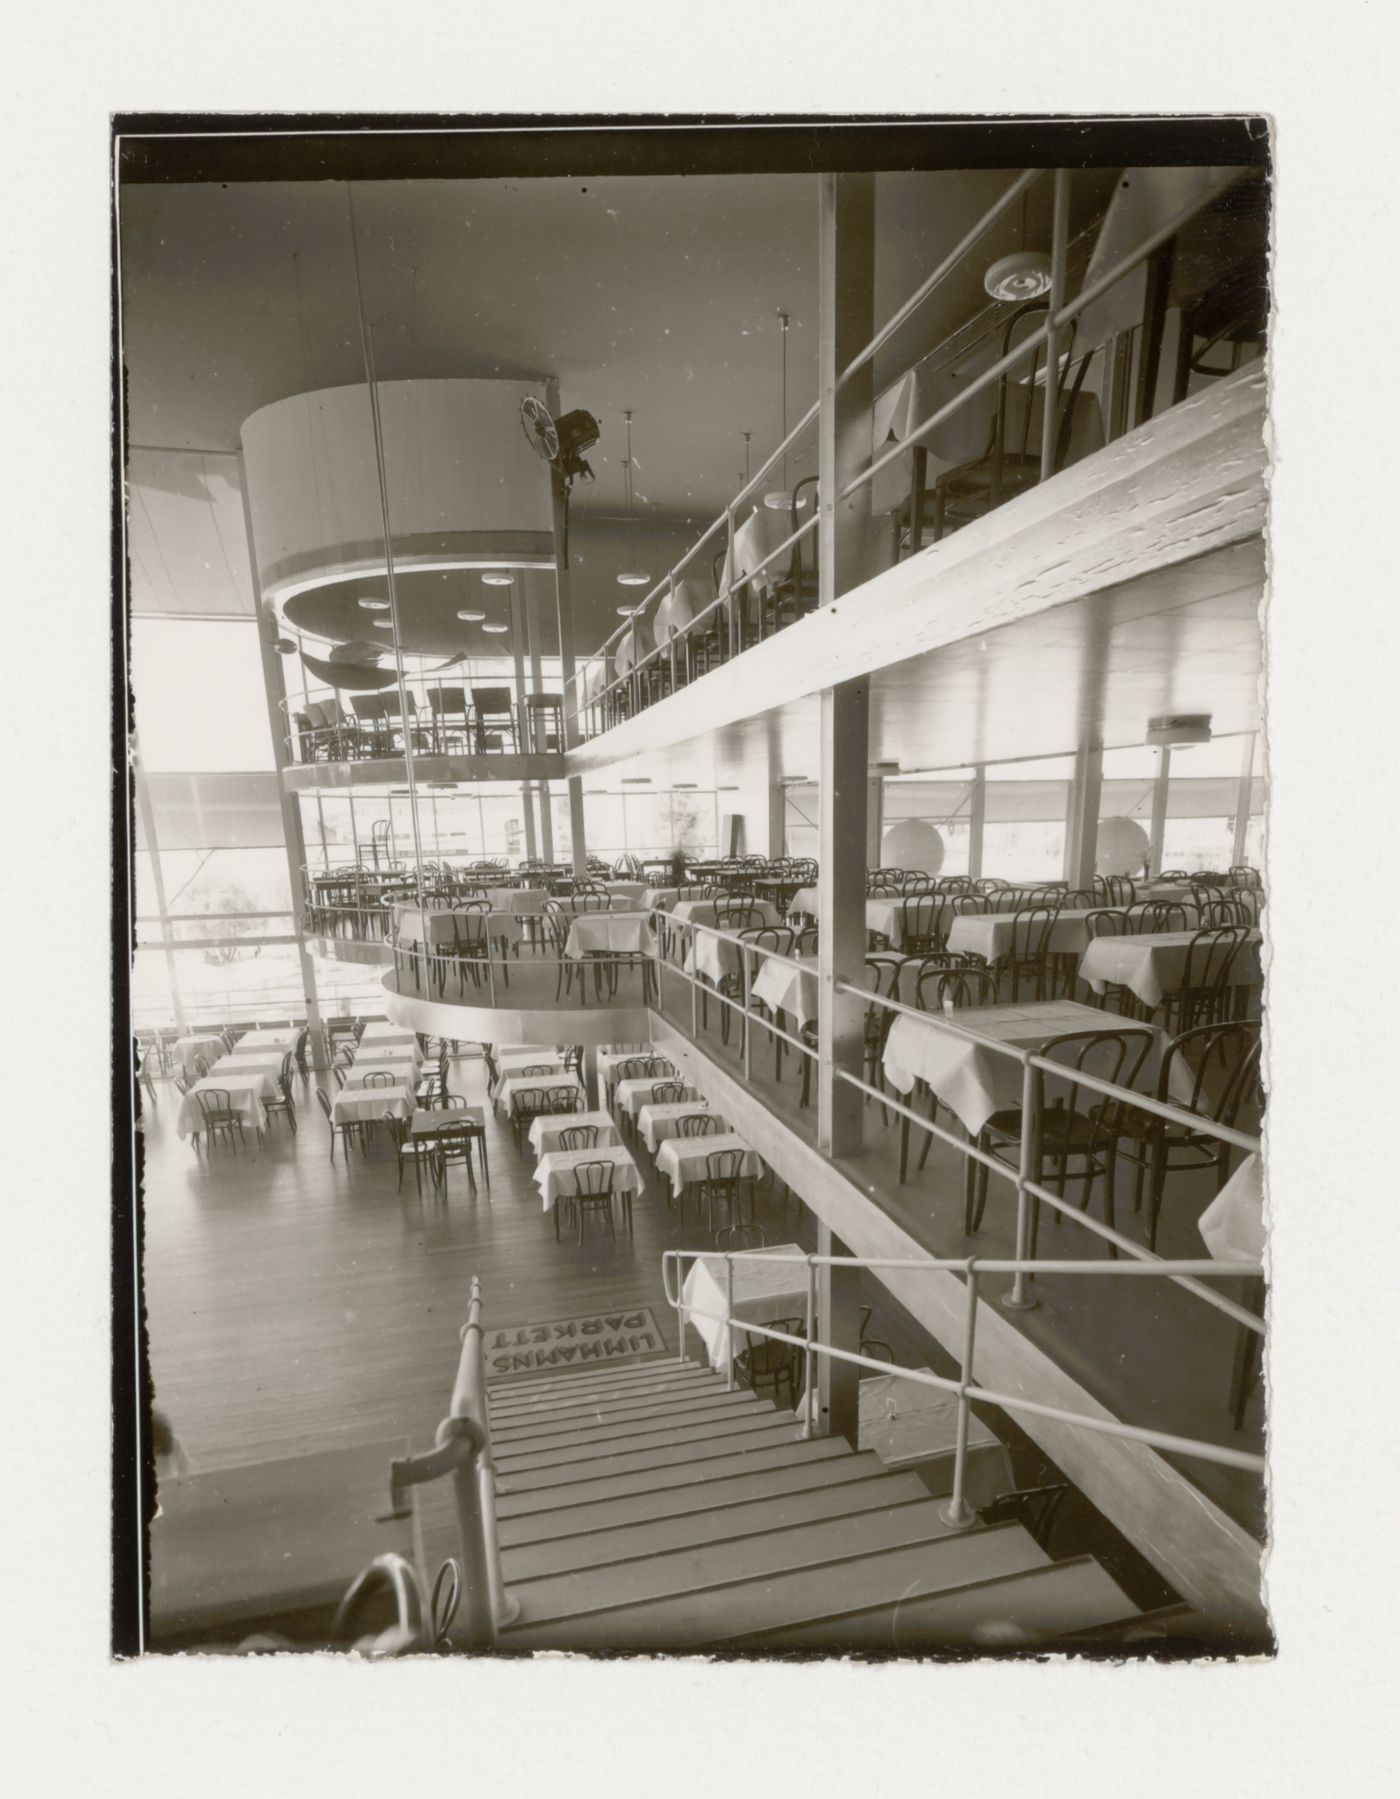 Interior view of Paradise Restaurant at the Stockholm Exhibition of 1930 showing the first floor and galleries, Stockholm